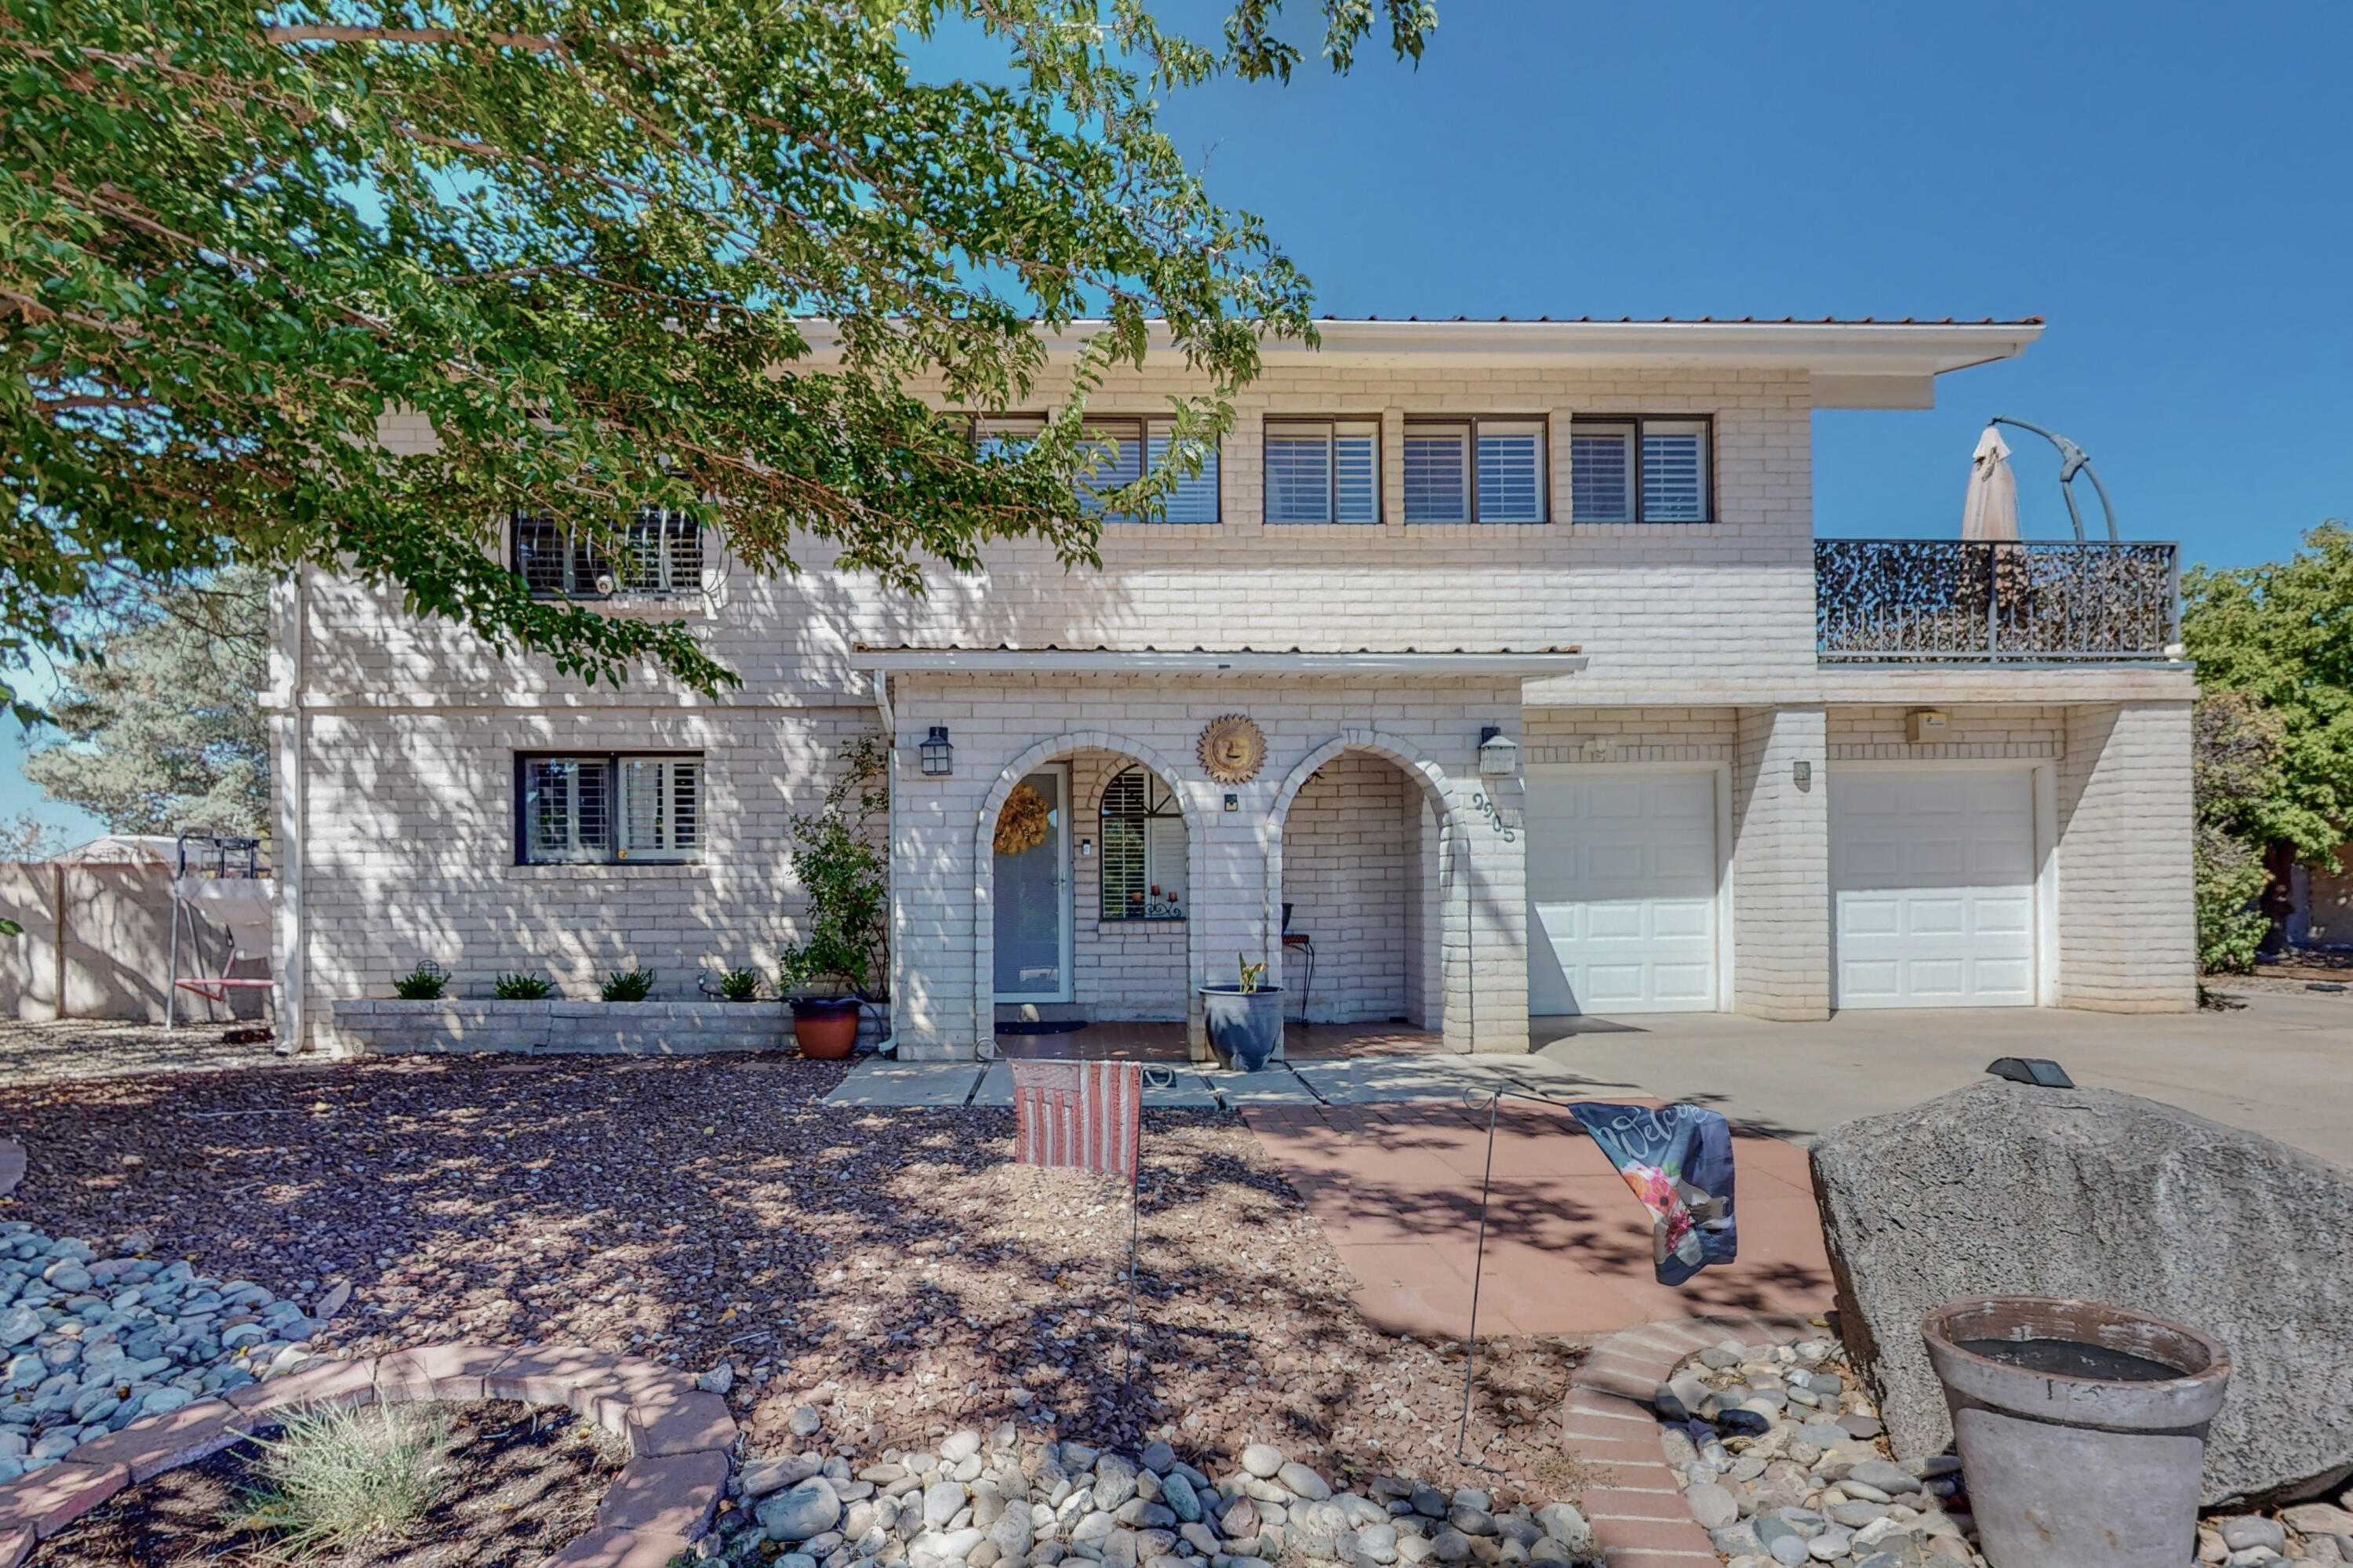 Welcome Home!  Beautiful 4 bedroom home plus an office with a premium lot with Golf Course views!!  Incredibly large backyard (.37 Acre) with a pool is an entertainer's dream! Home features REFRIGERATED AIR, updated kitchen, ton of natural light.  You will not be disappointed!